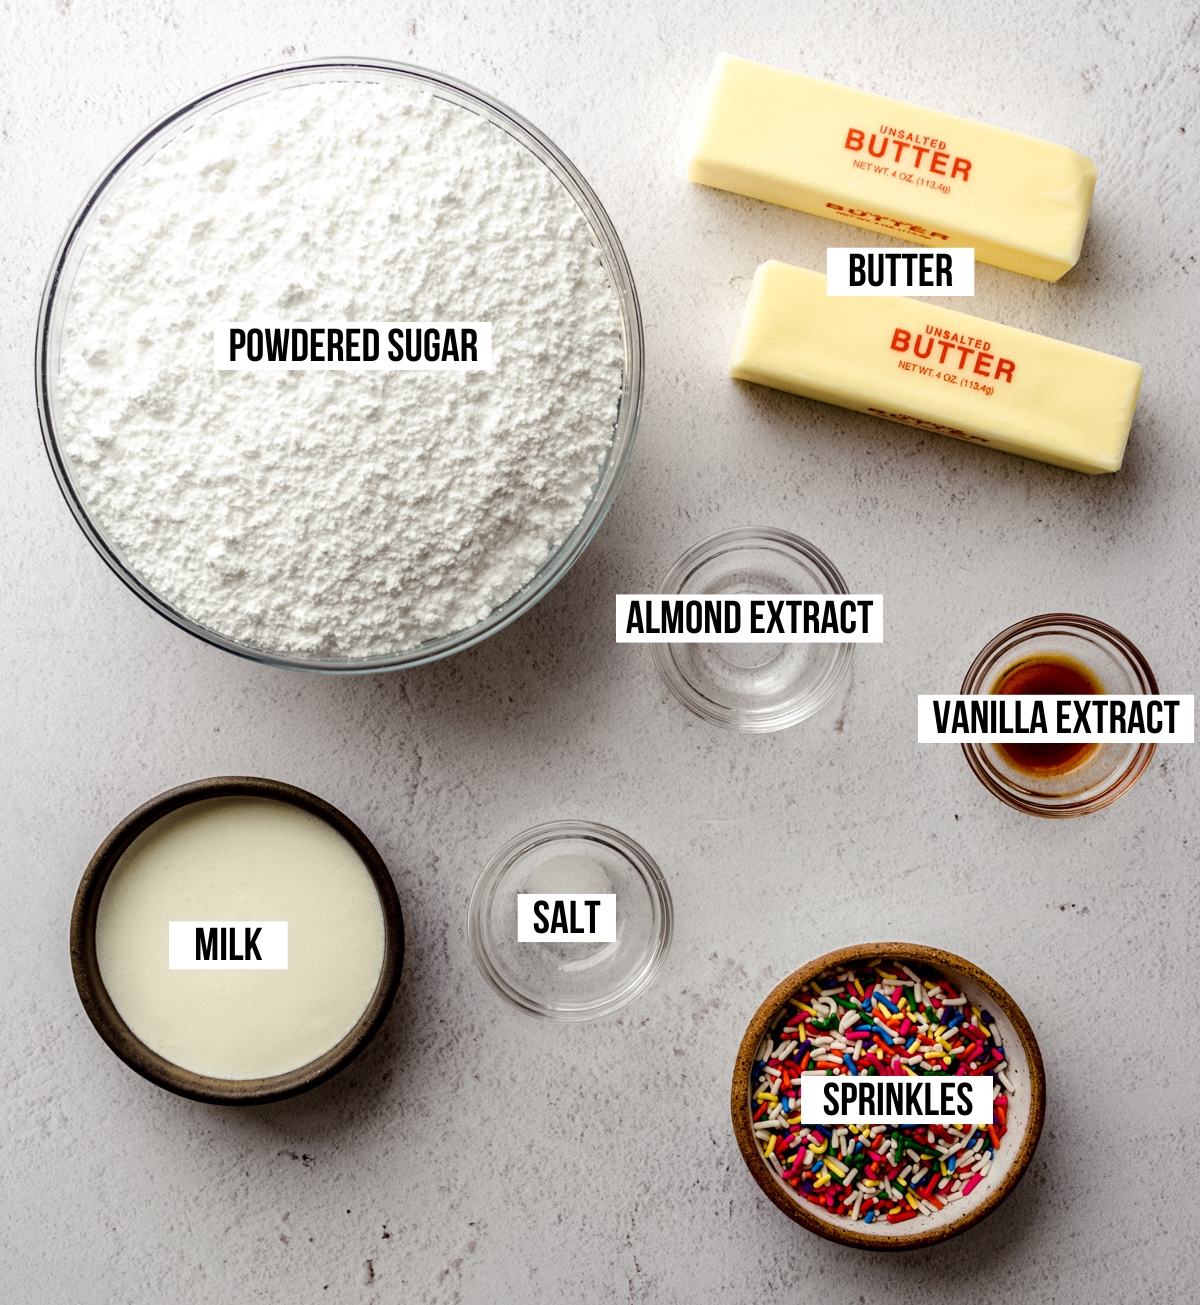 Aerial photo of ingredients for funfetti buttercream on a surface with text overlay labeling each ingredient.